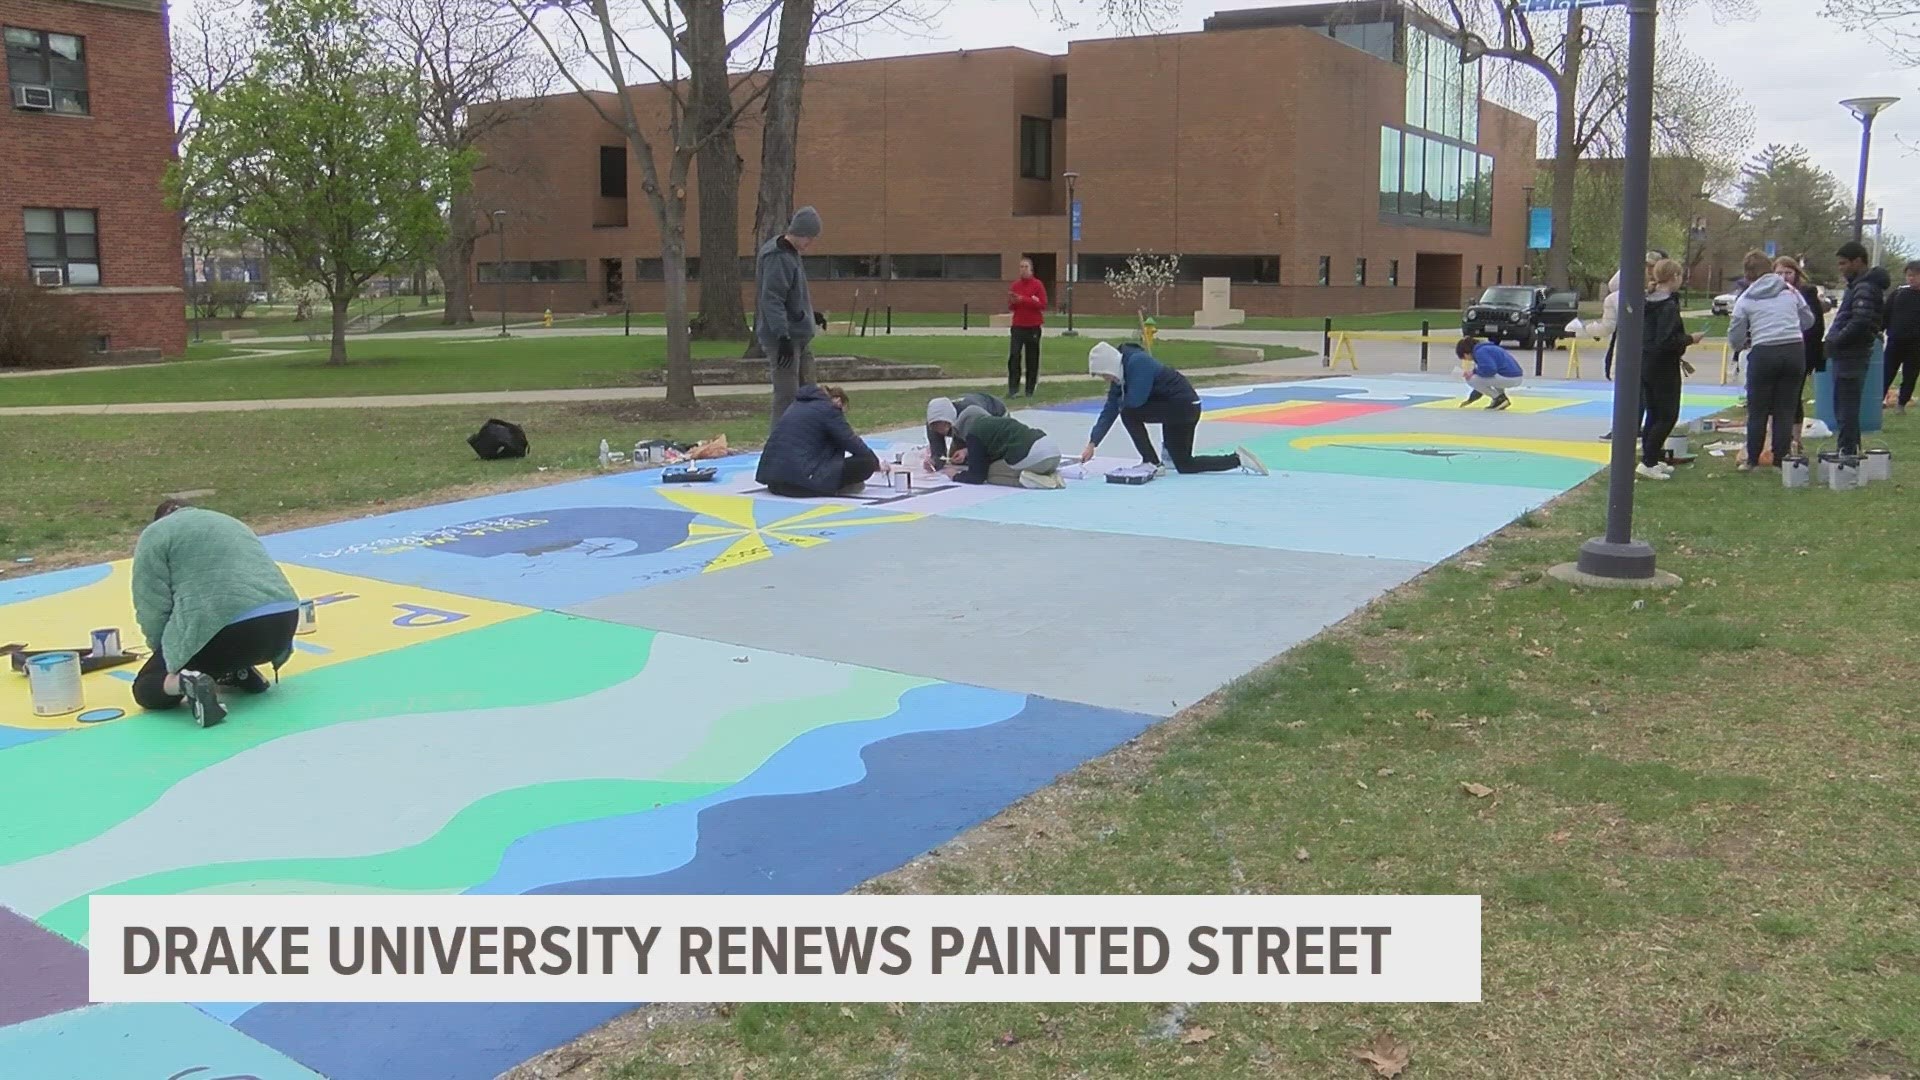 This year's theme for Painted Street is "Making Waves".